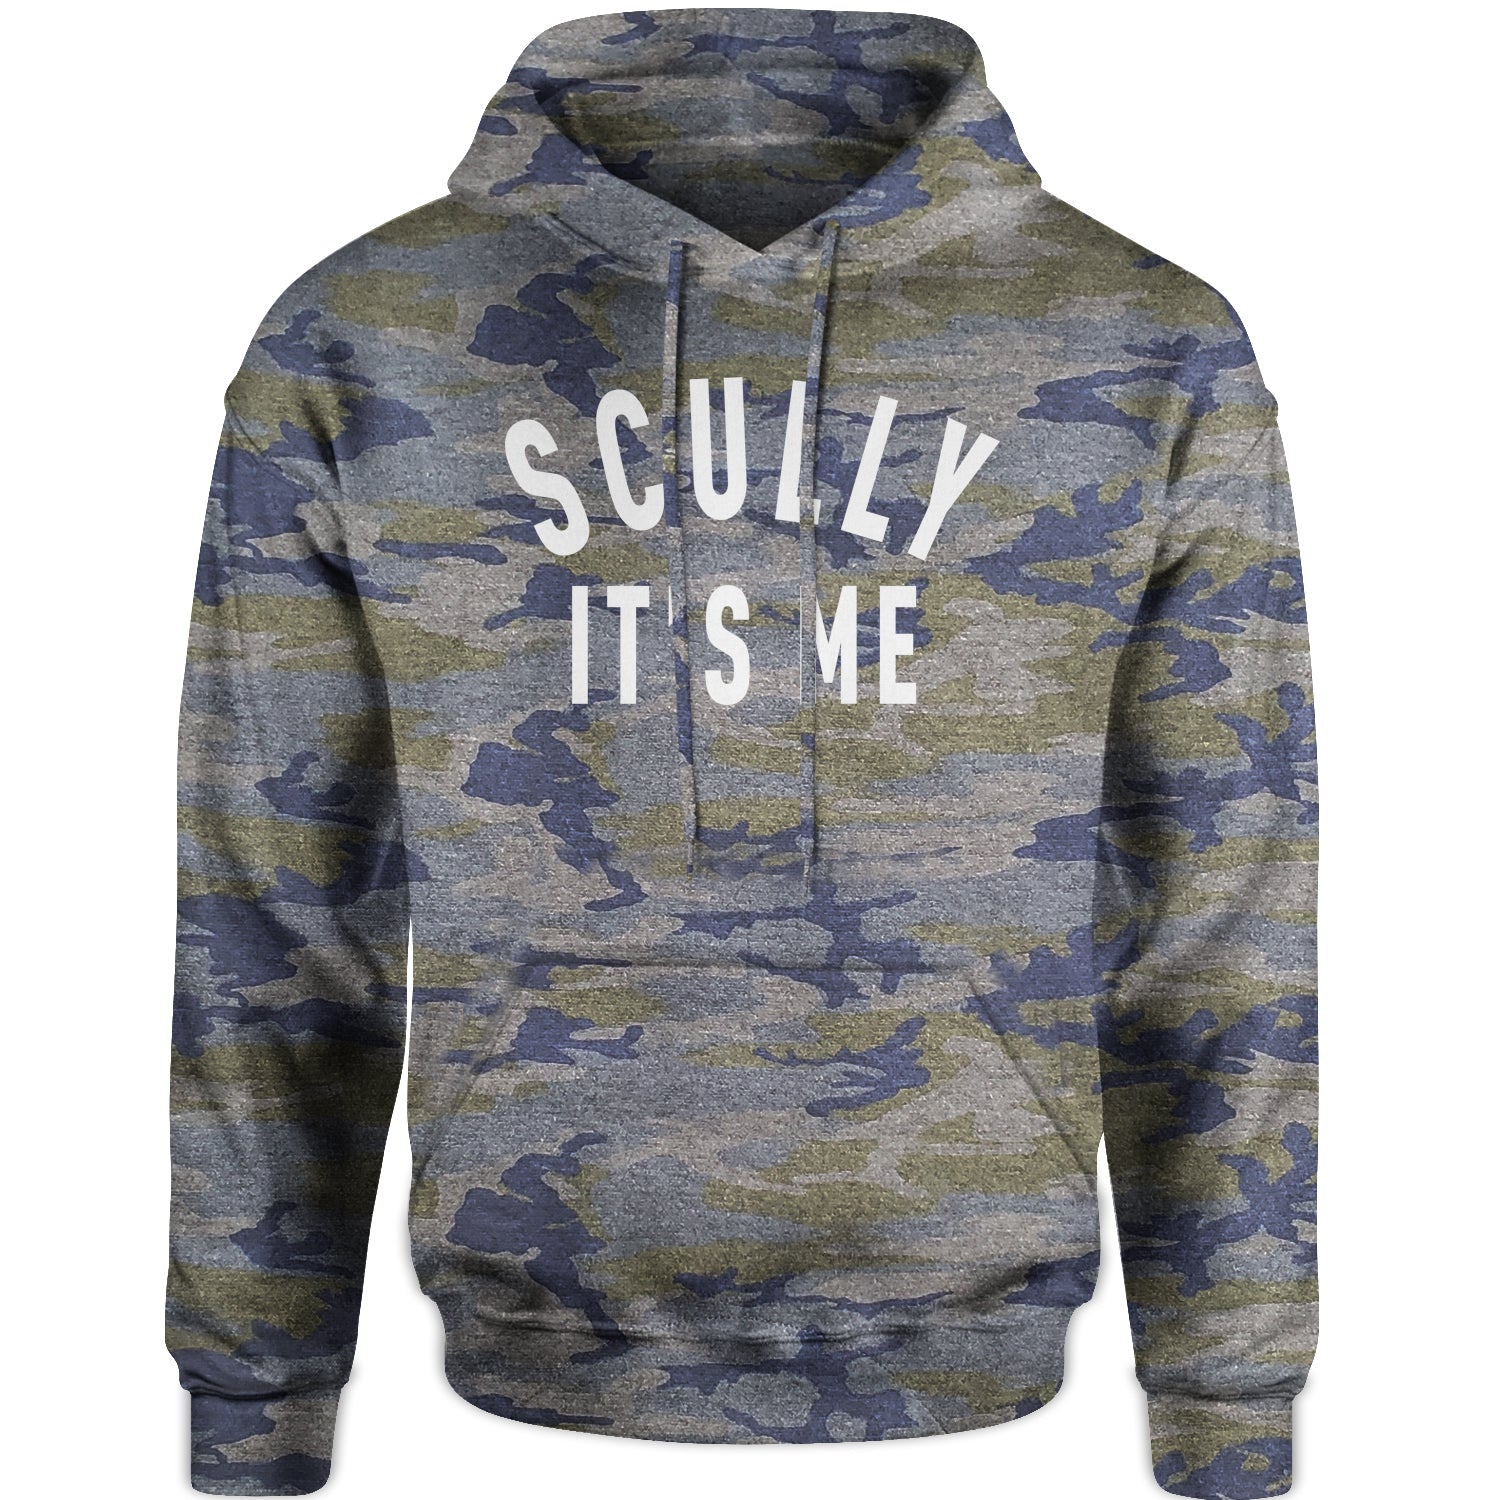 Scully, It's Me Adult Hoodie Sweatshirt #expressiontees by Expression Tees